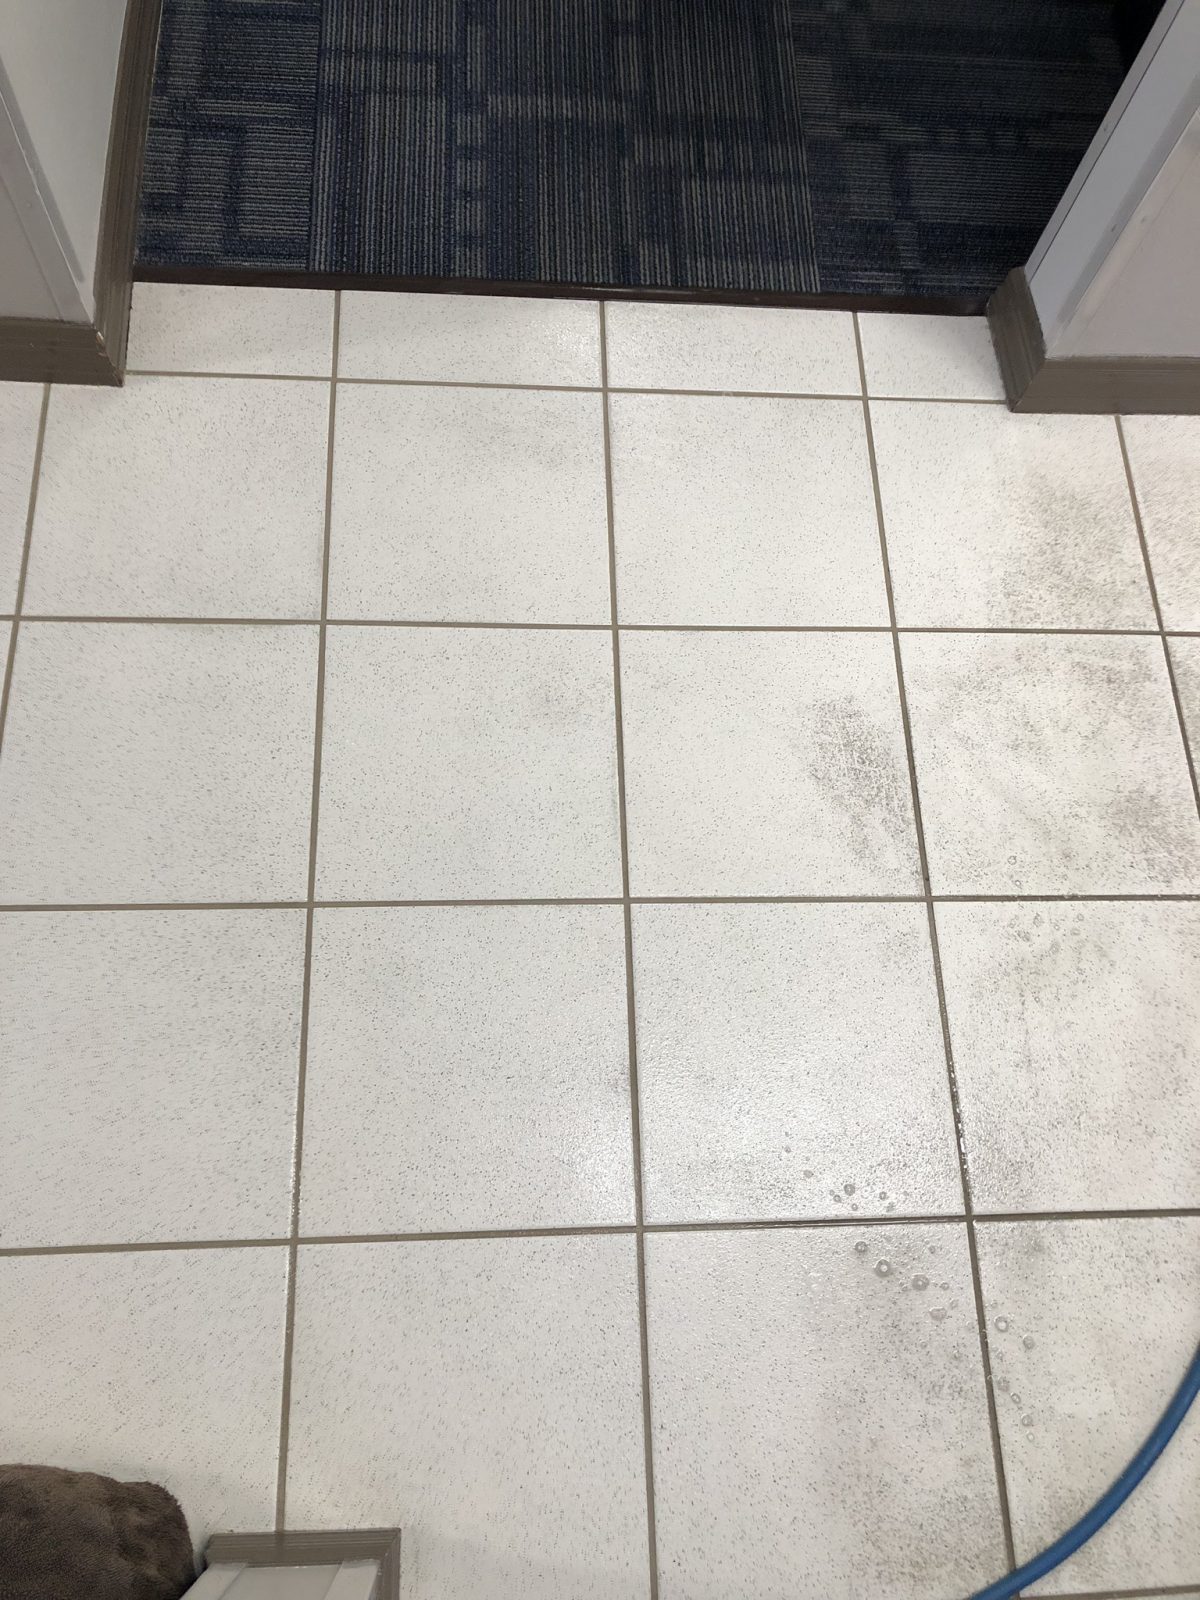 Professional Tile & Grout Cleaning Clearwater Florida by Howards Cleaning Service